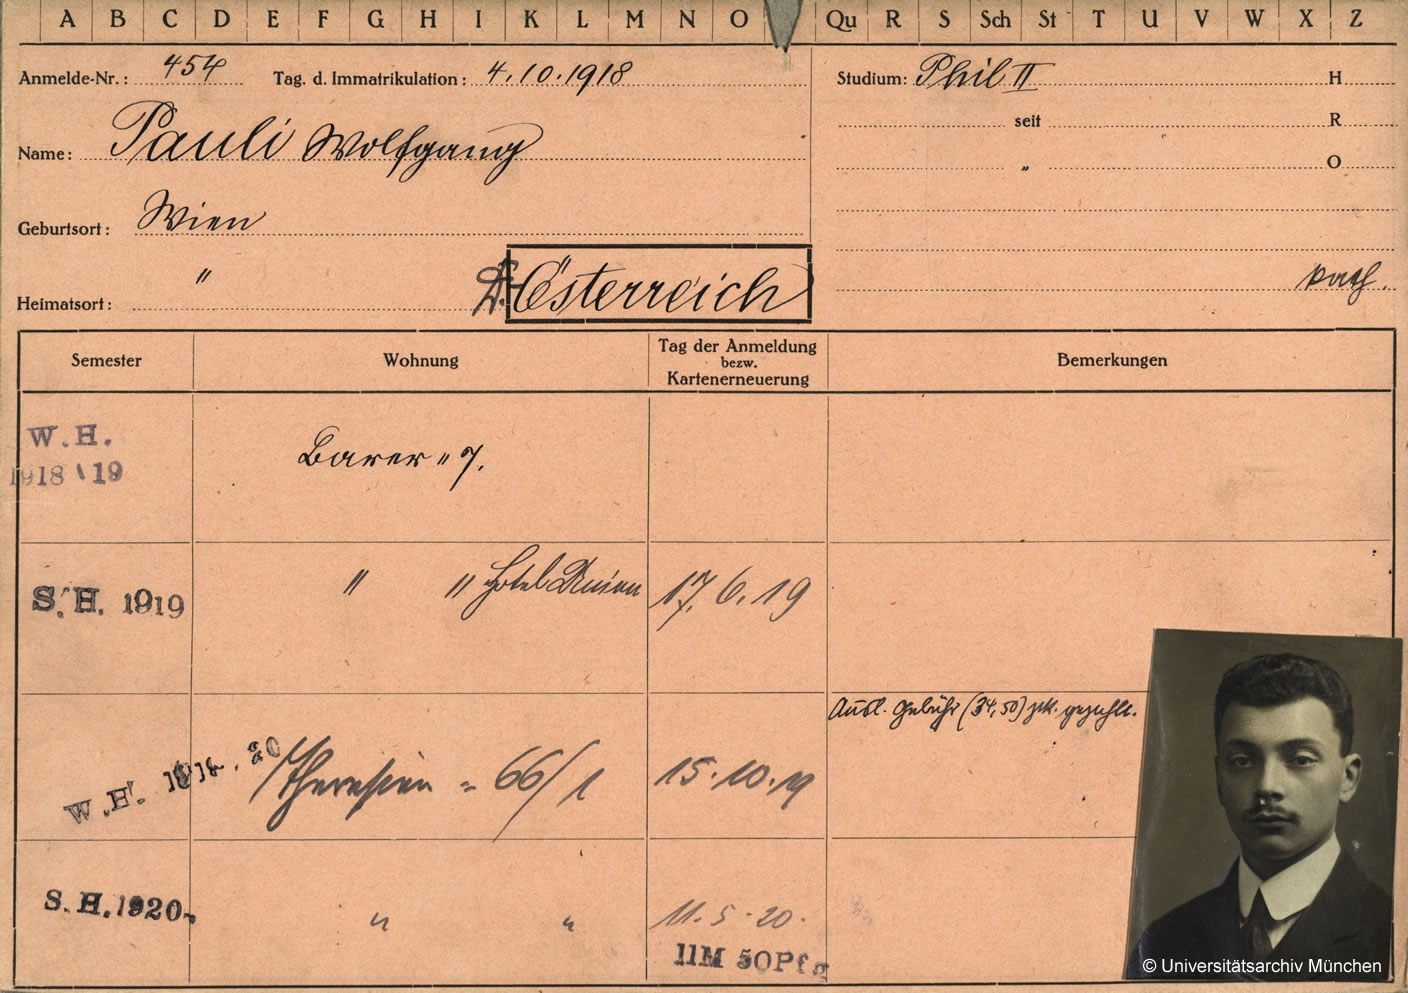 Data from Wolfgang Paulis student card of the University of Munich. In the lower right corner a small portrait of him is visible.